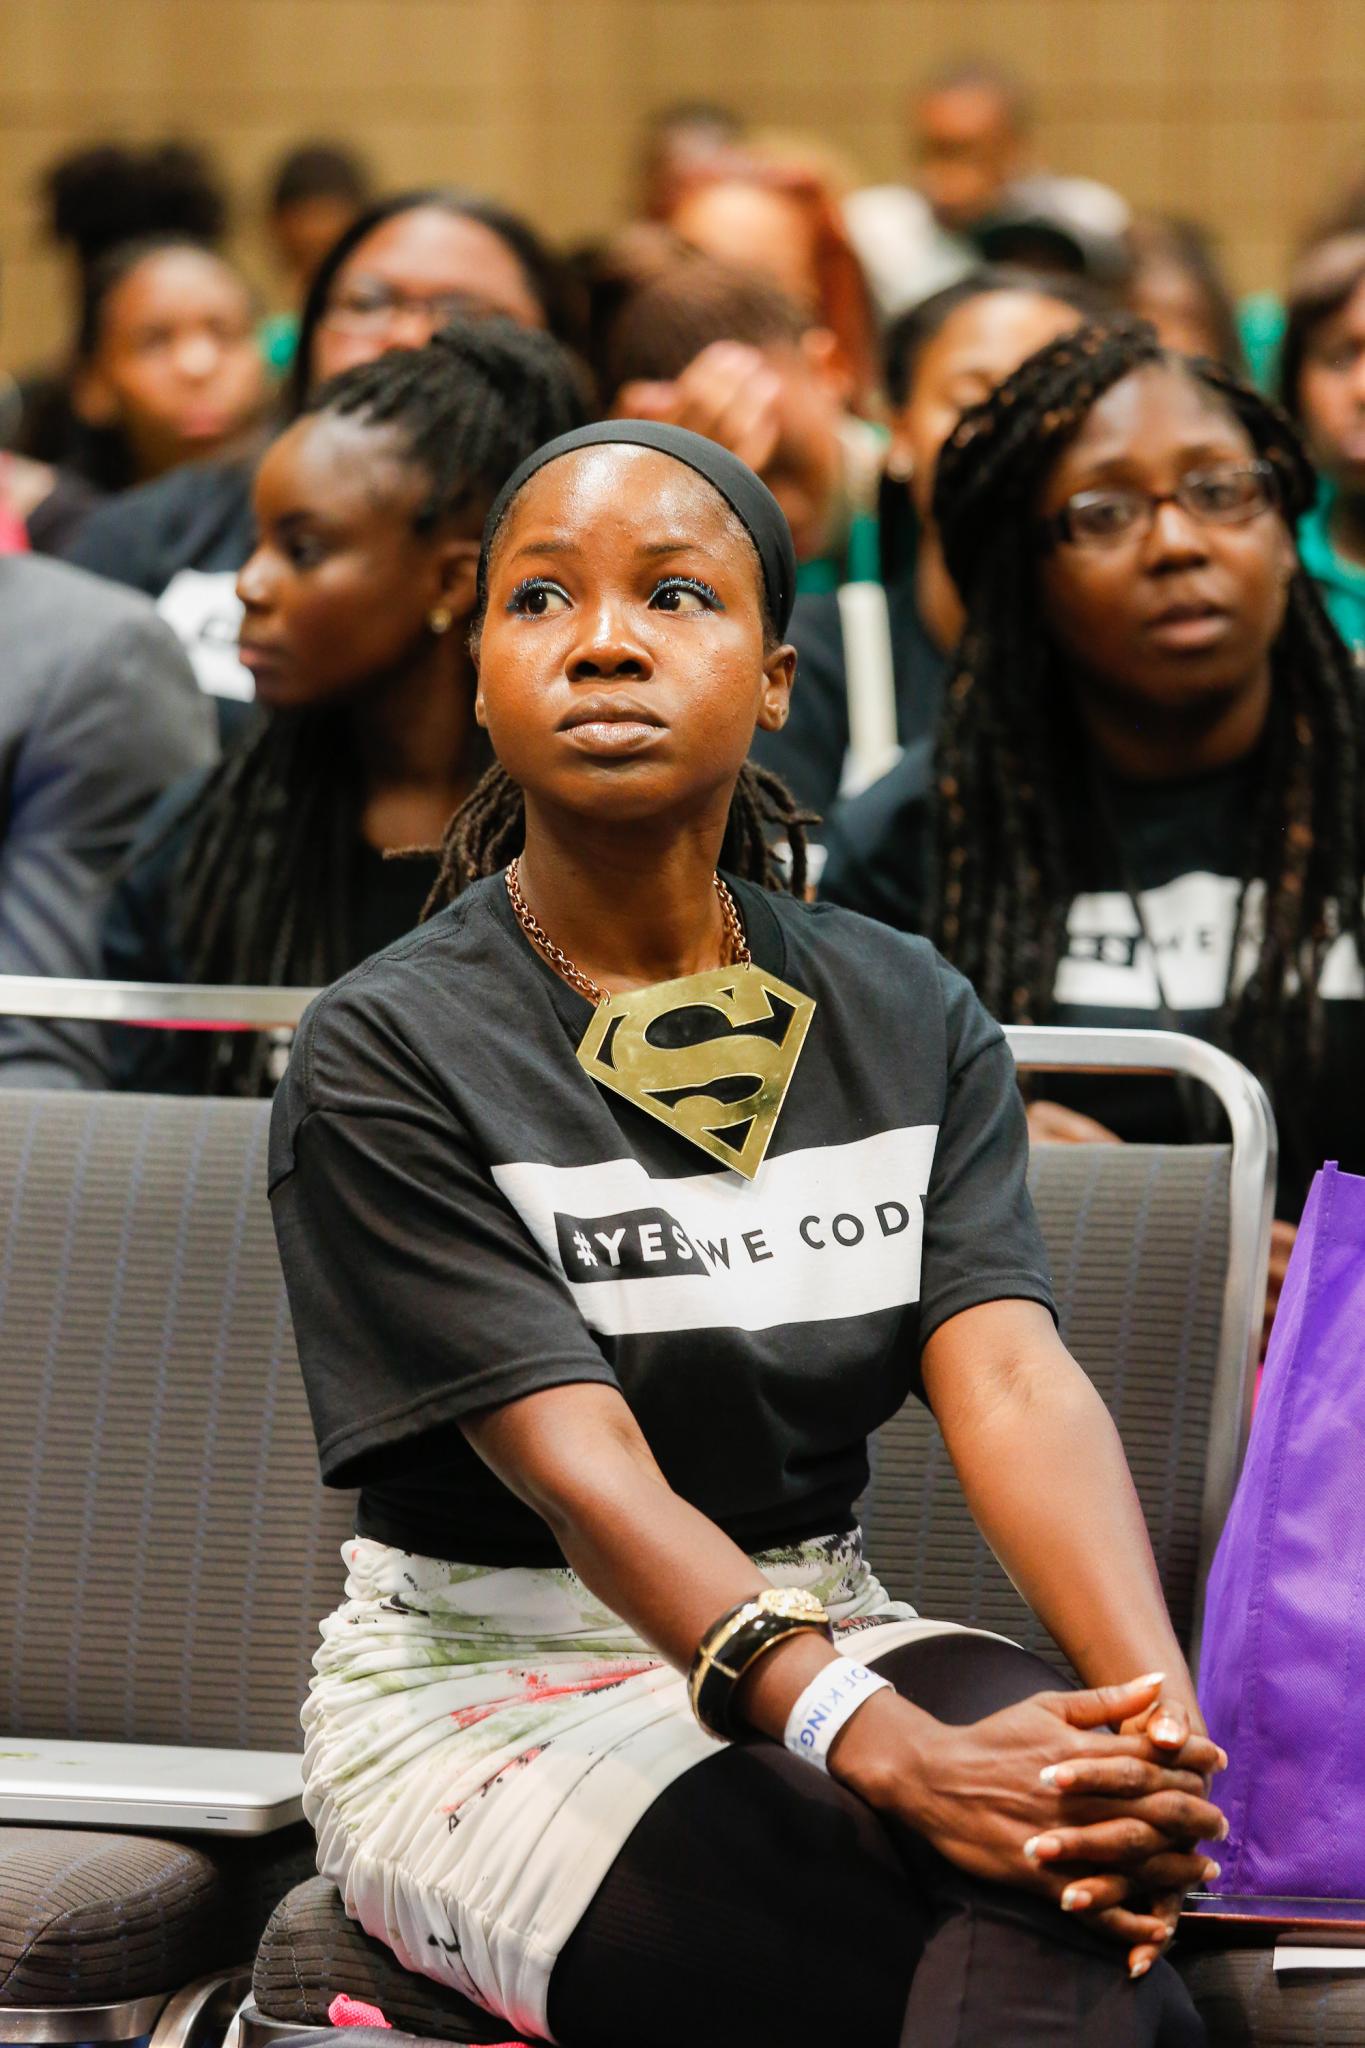 #YESWECODE: Kids Learn to Code at Festival Hack-A-Thon